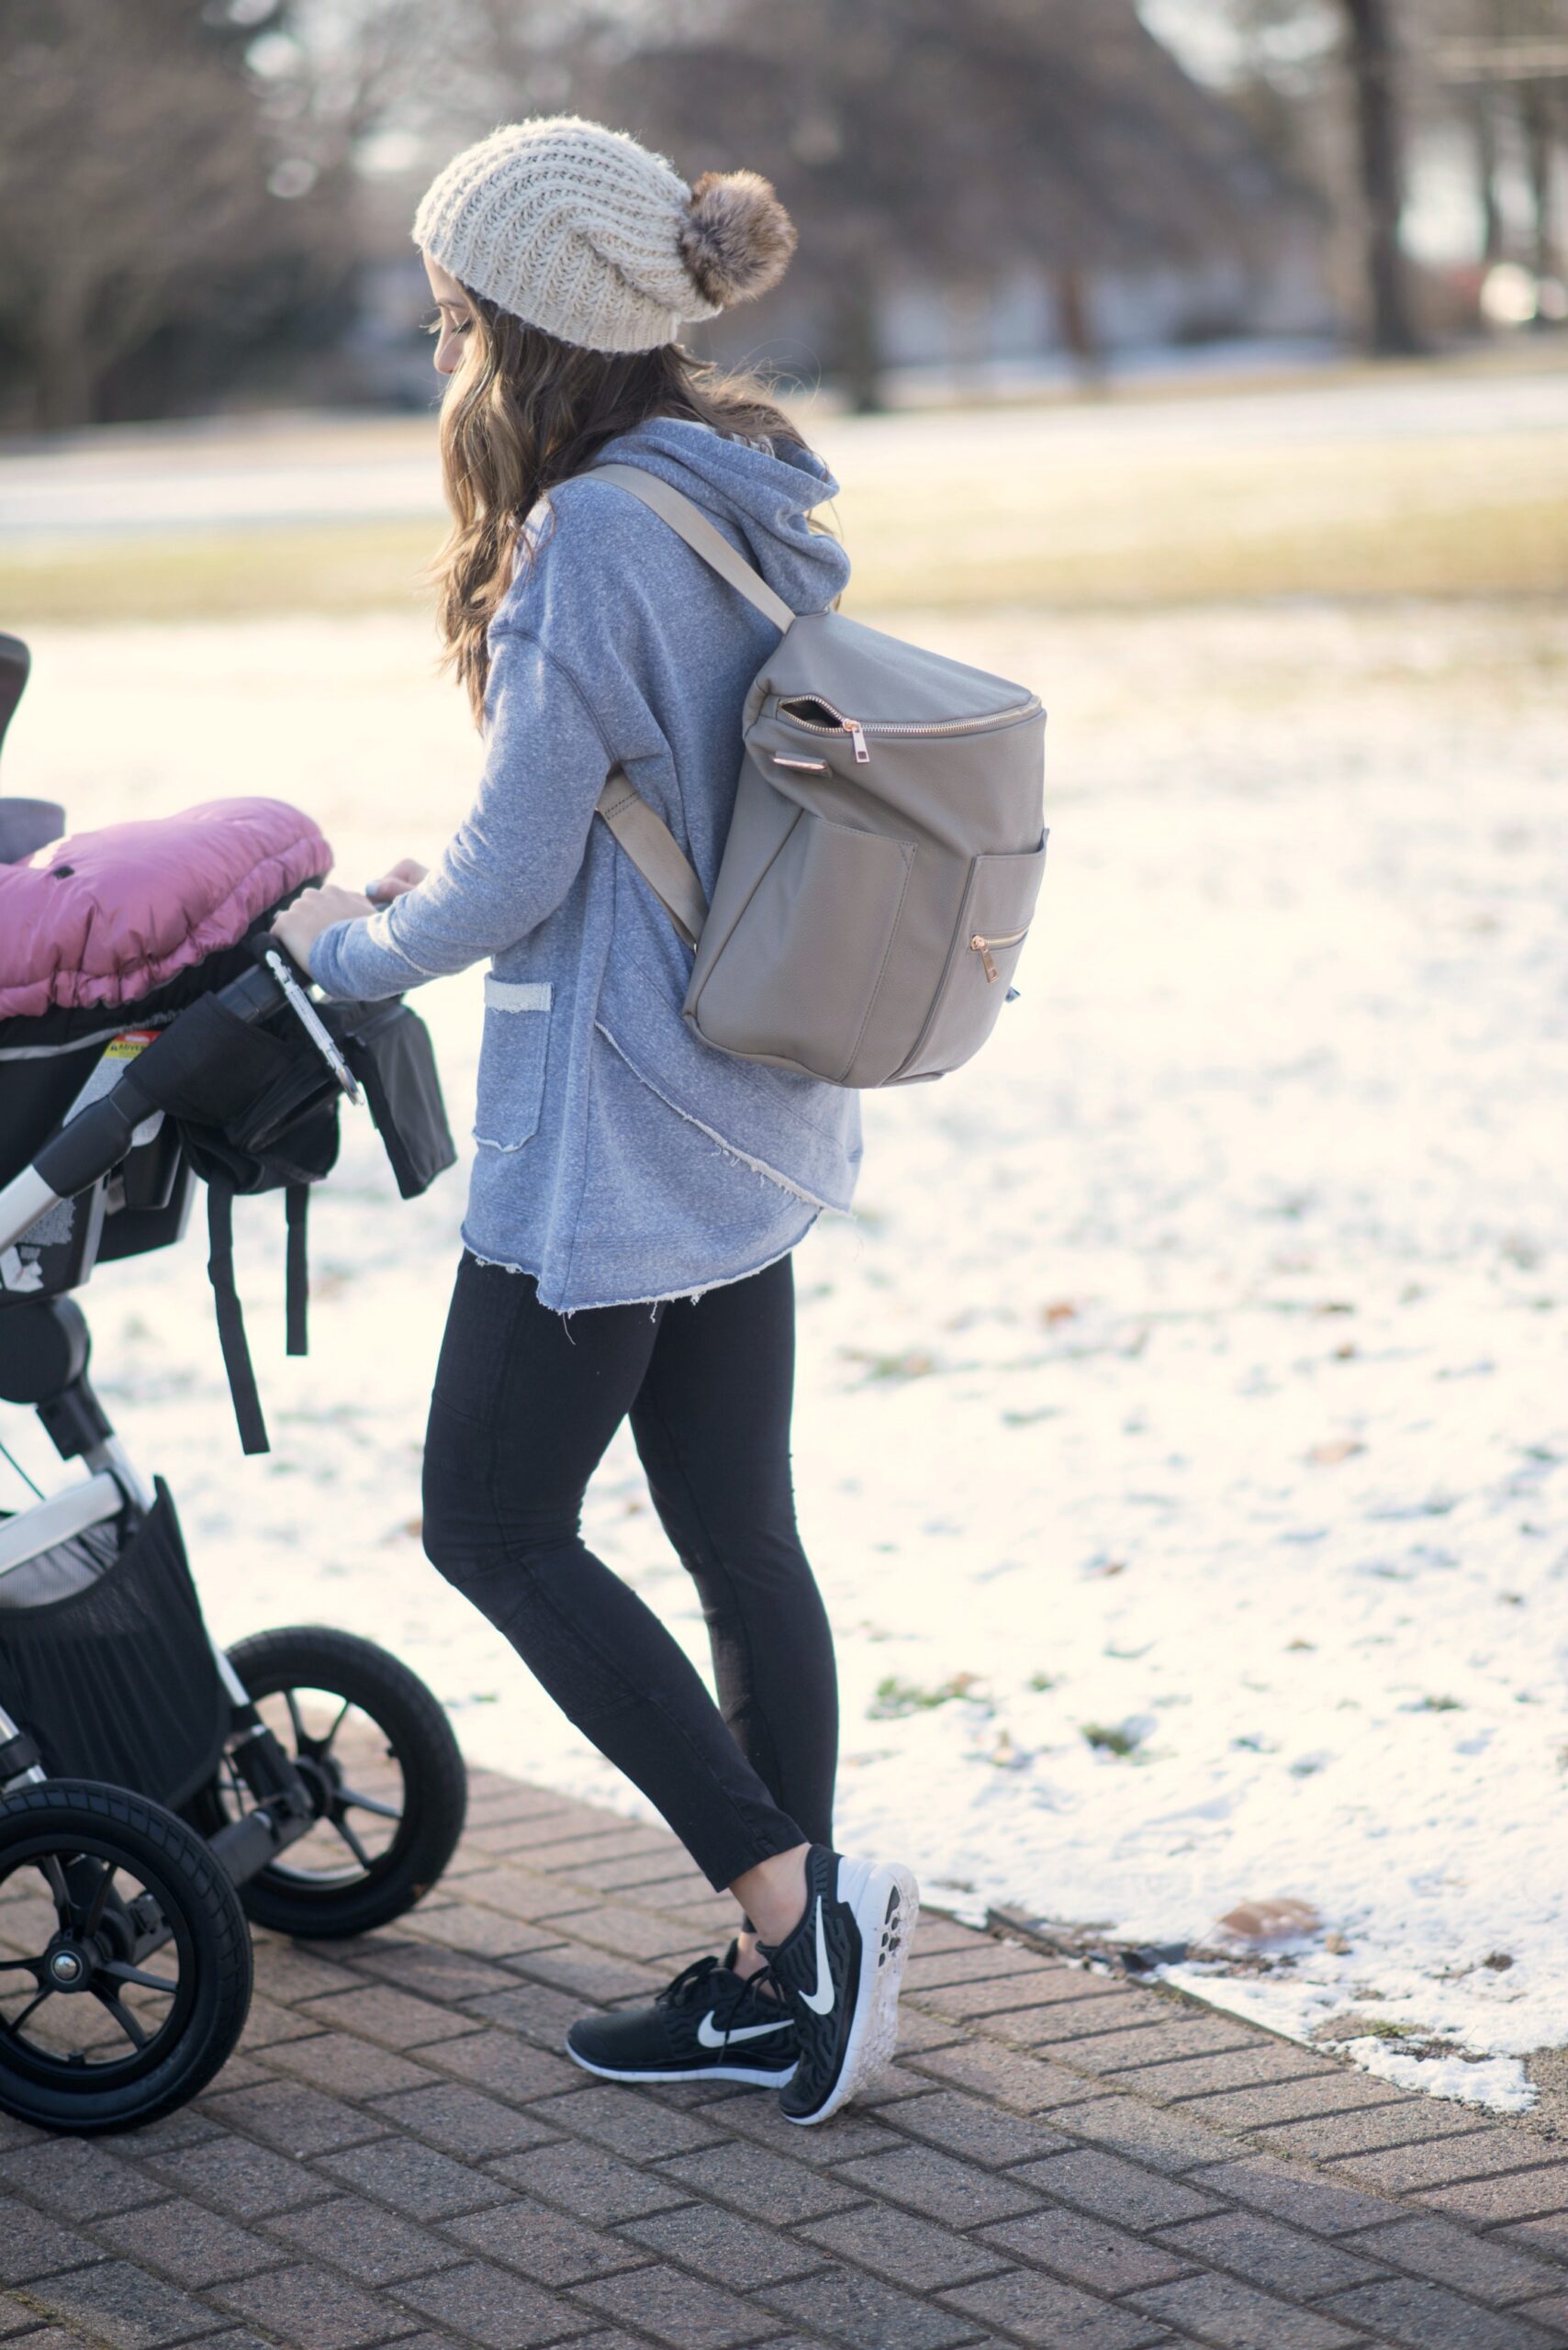 fawn design diaper backpack